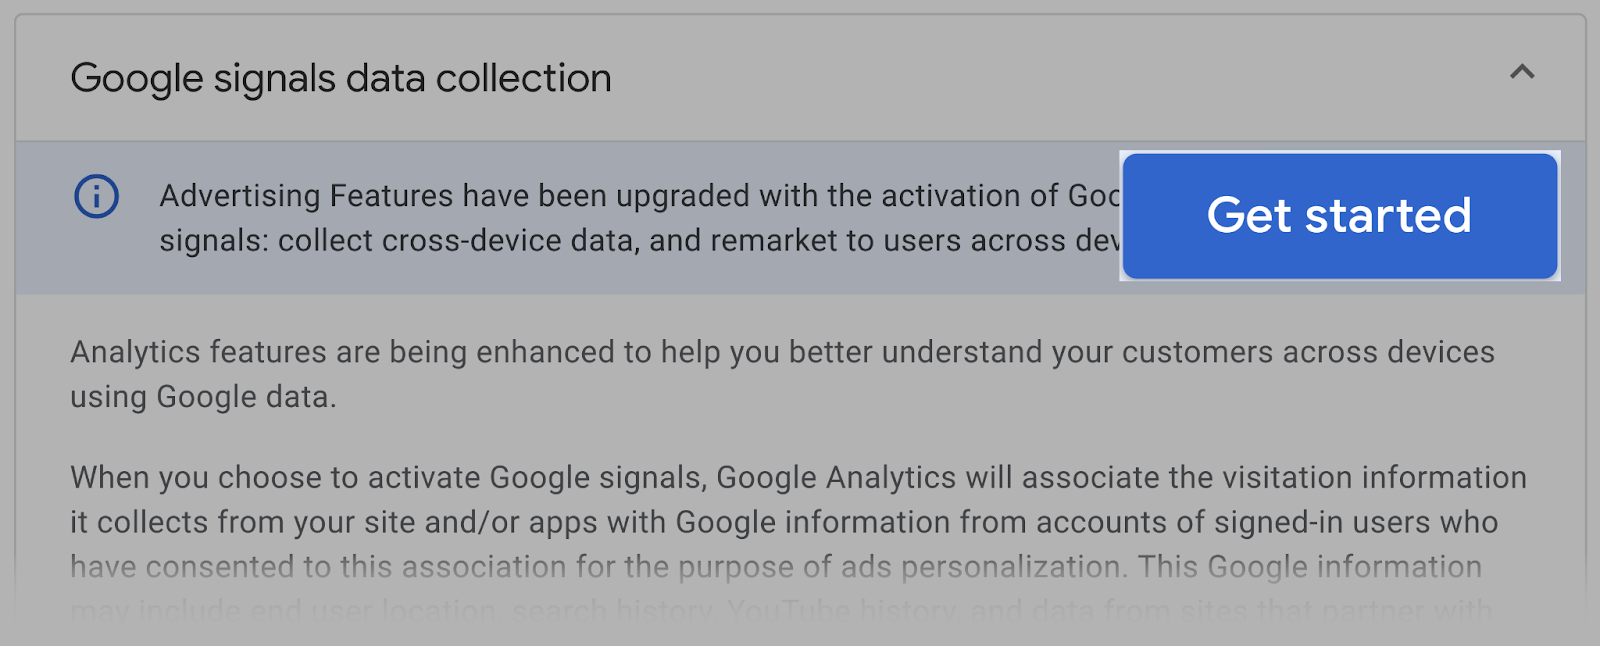 Get s،ed with Google signals data collection